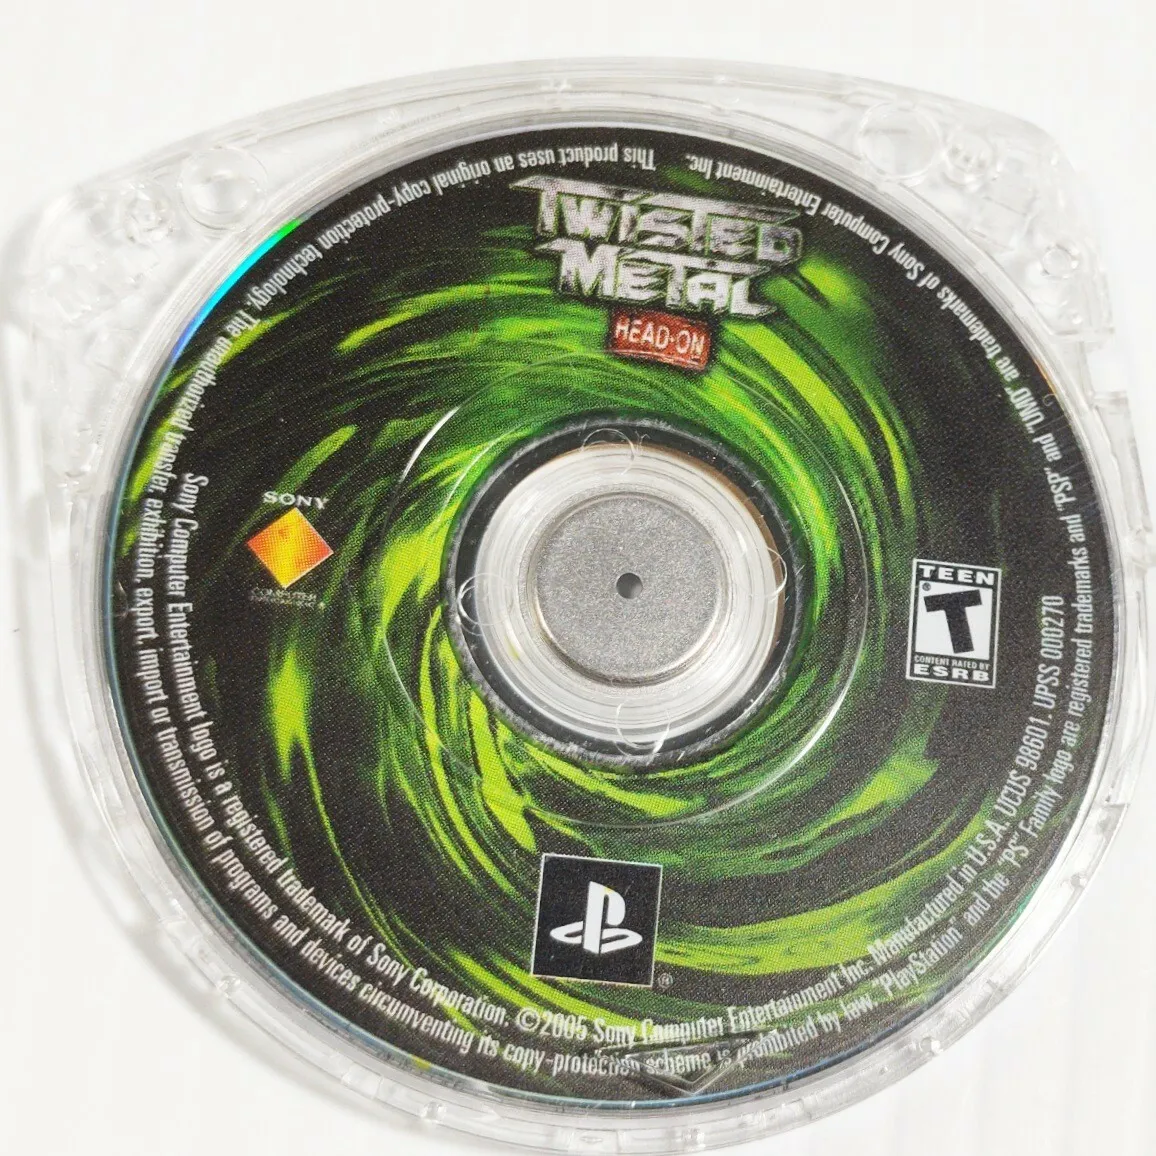 Twisted Metal Head On PSP Playstation Portable Game Disc Only